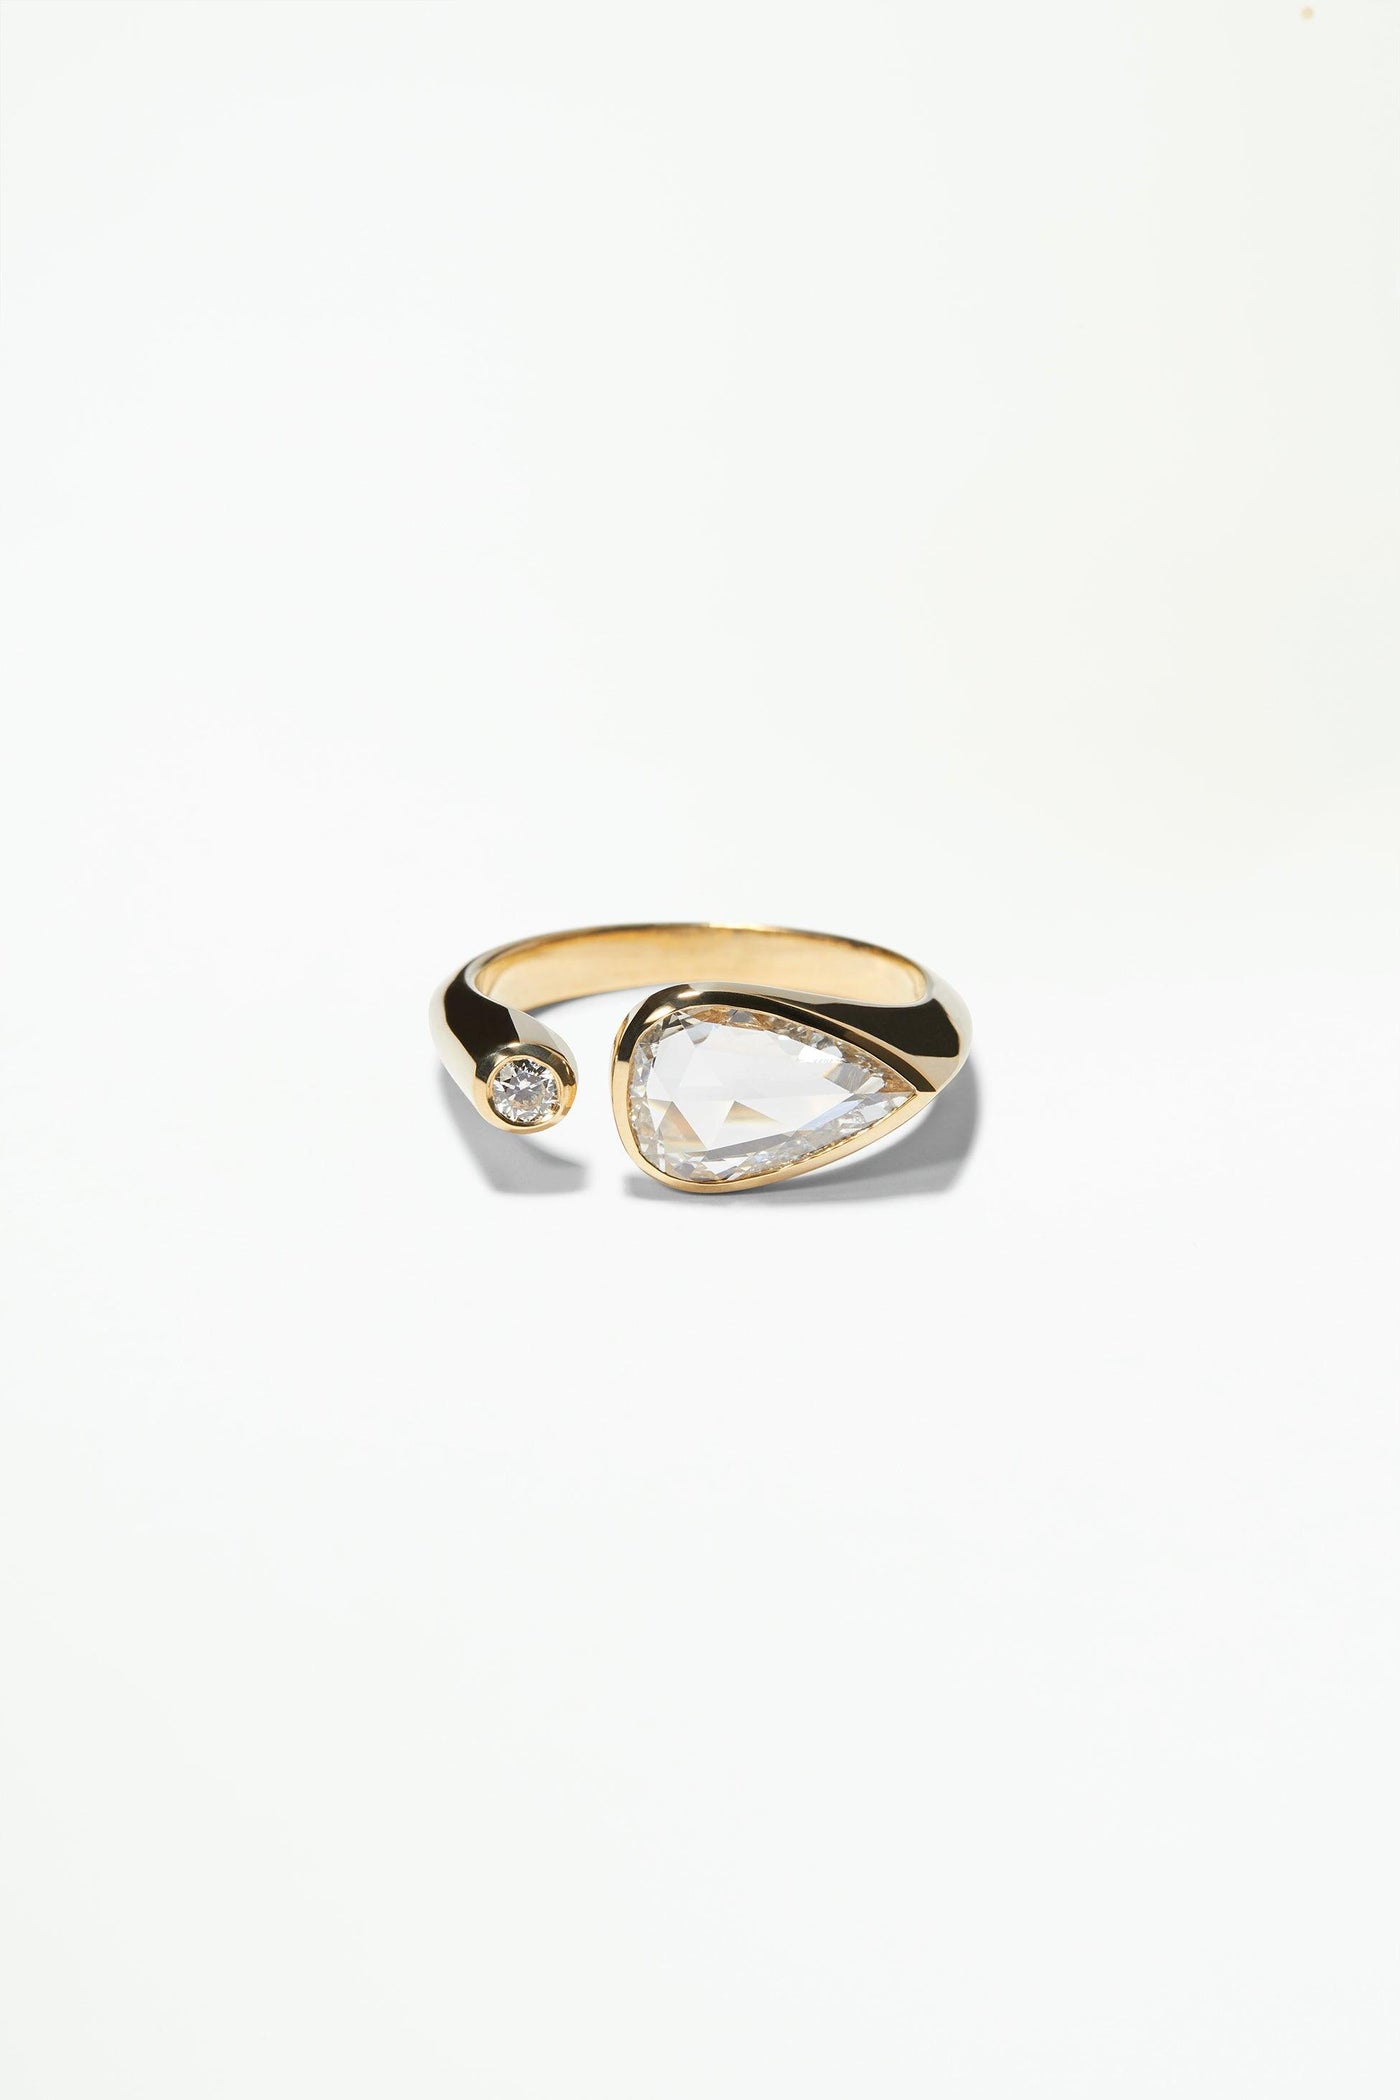 One of a Kind Dyad Signet Ring No. 2 - WWAKE